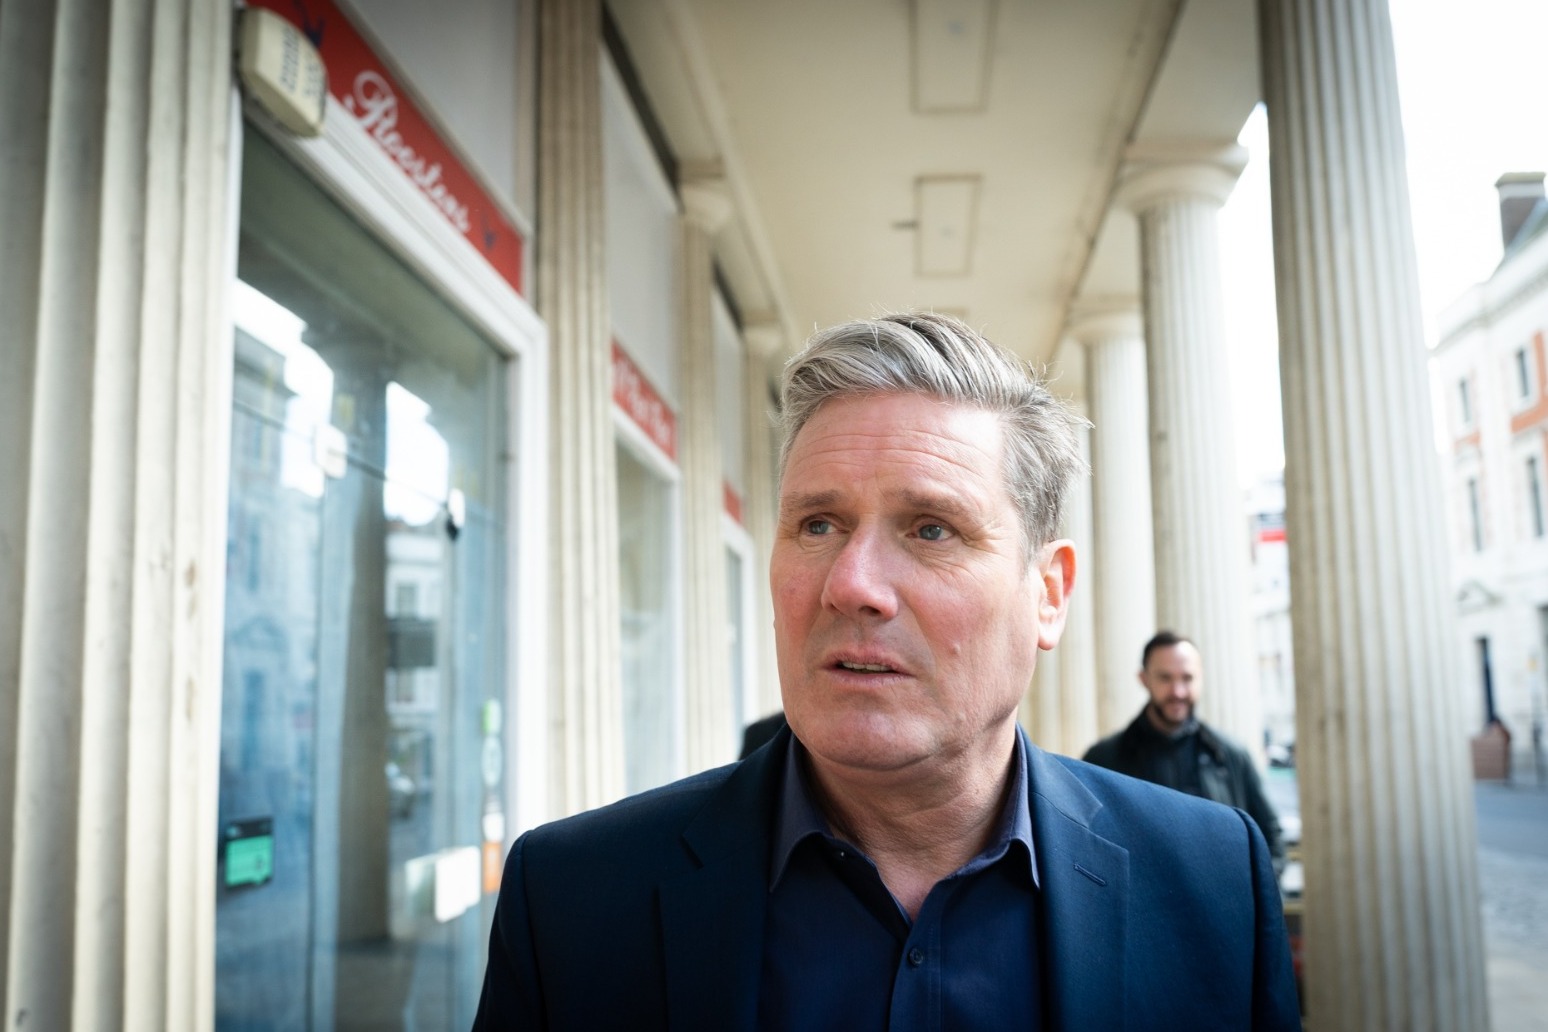 Starmer accuses Sunak of rank hypocrisy for using schemes to avoid tax